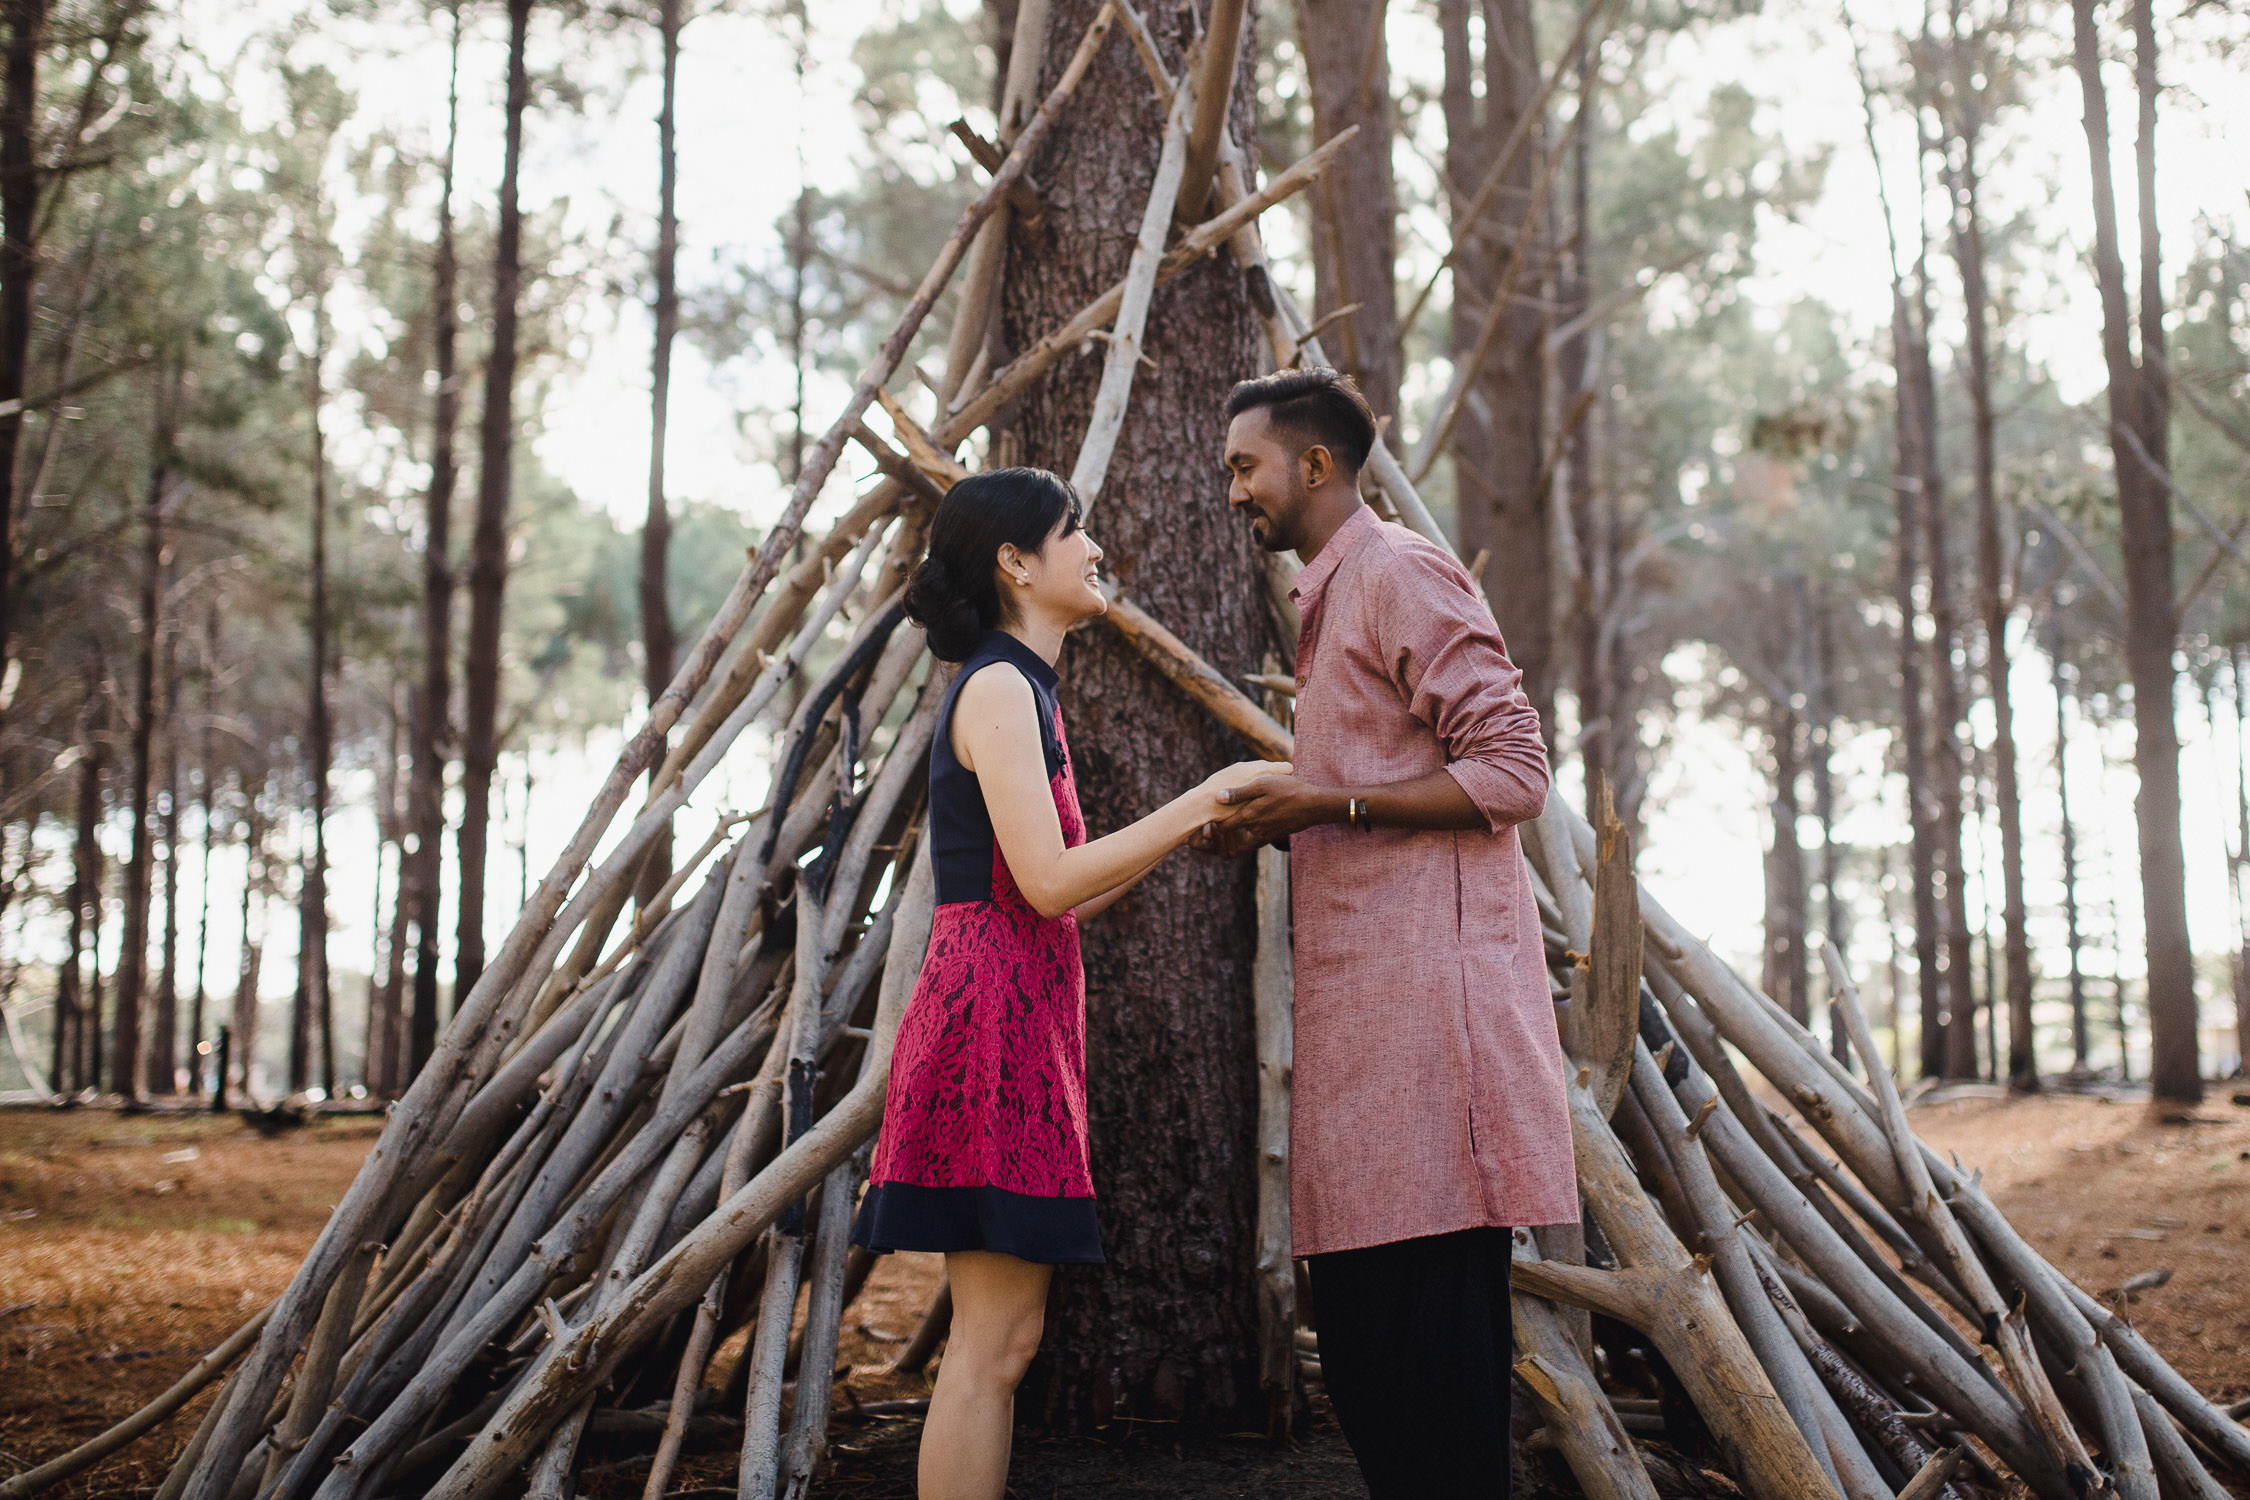 Perth pre-wedding at Lancelin sand dunes, Pinnacles Desert and forest by Naz on OneThreeOneFour 16